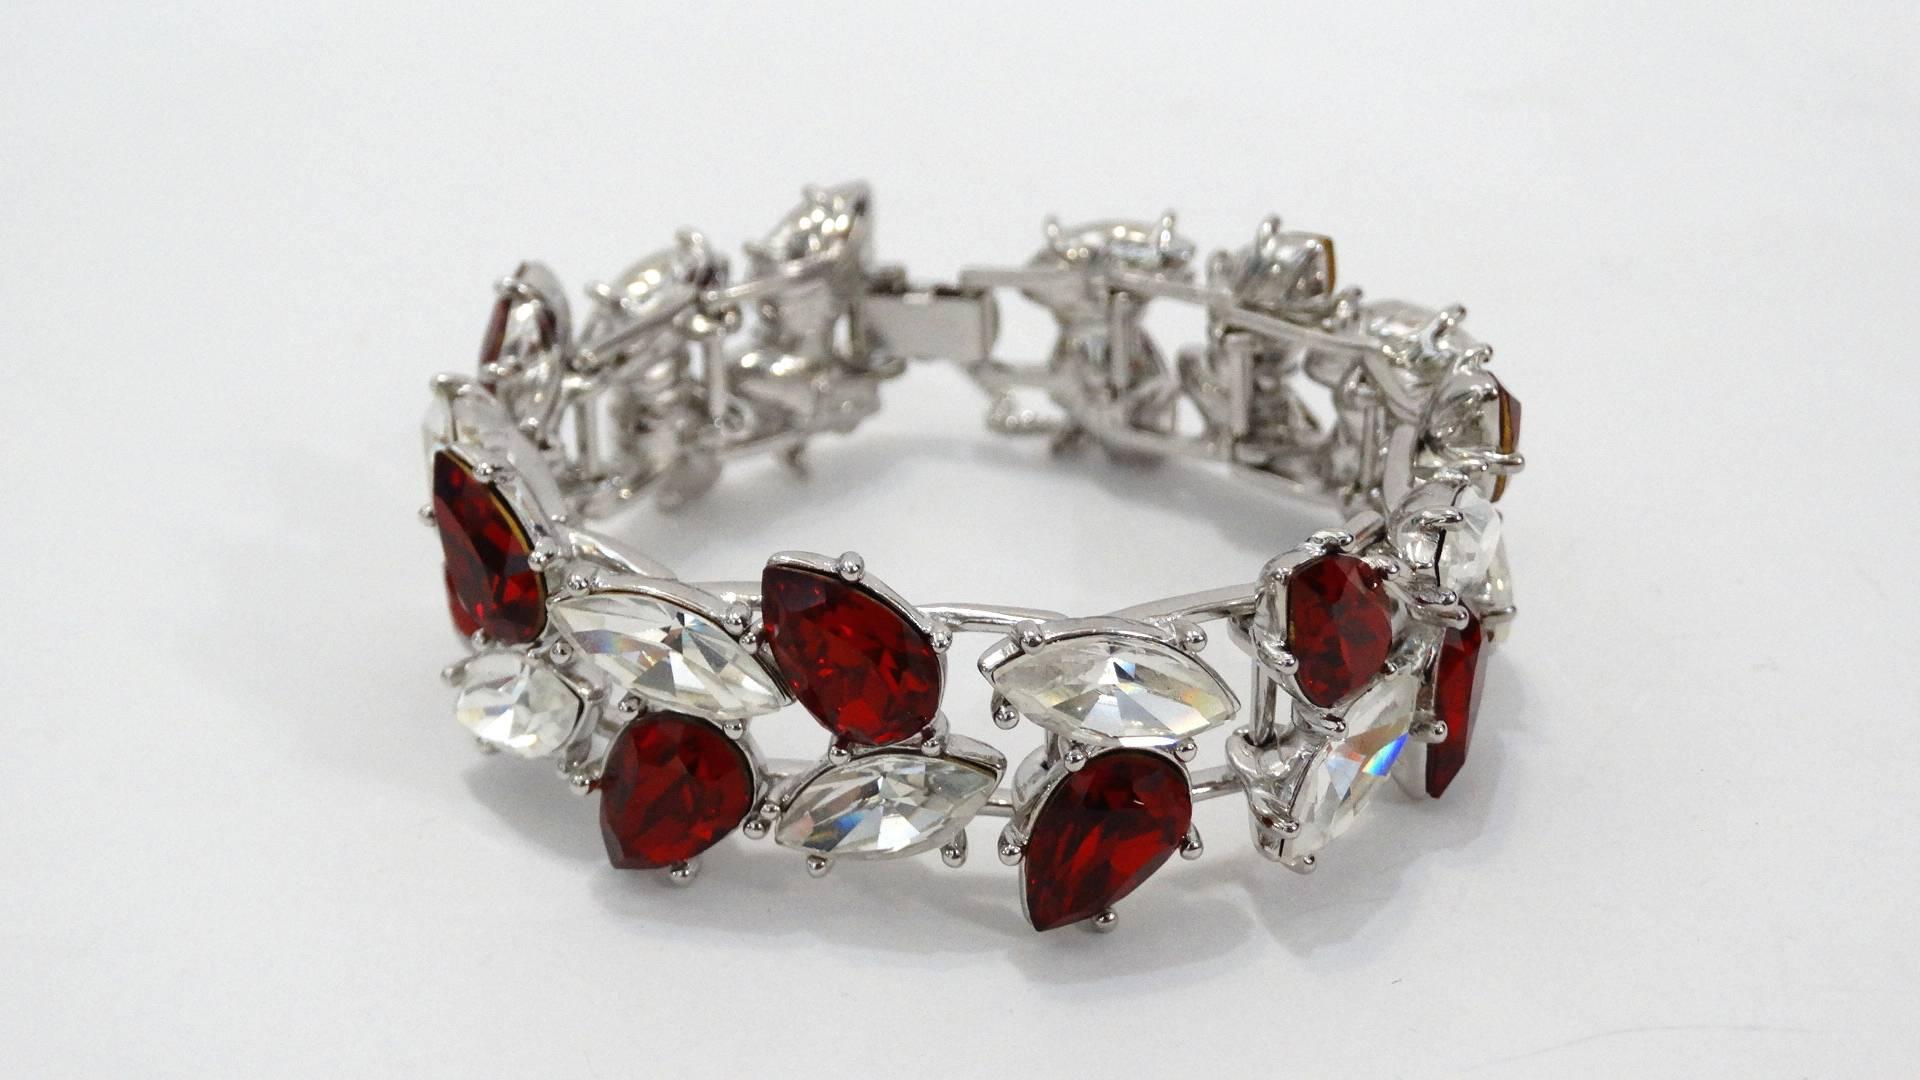 Elevate your evening wear with our amazing 1990s Yves Saint Laurent rhinestone bracelet! Made of a quality silver metal encrusted with leaf-like red and crystal rhinestone gems. Wraps comfortable around the wrist with chain attached to hook closure.